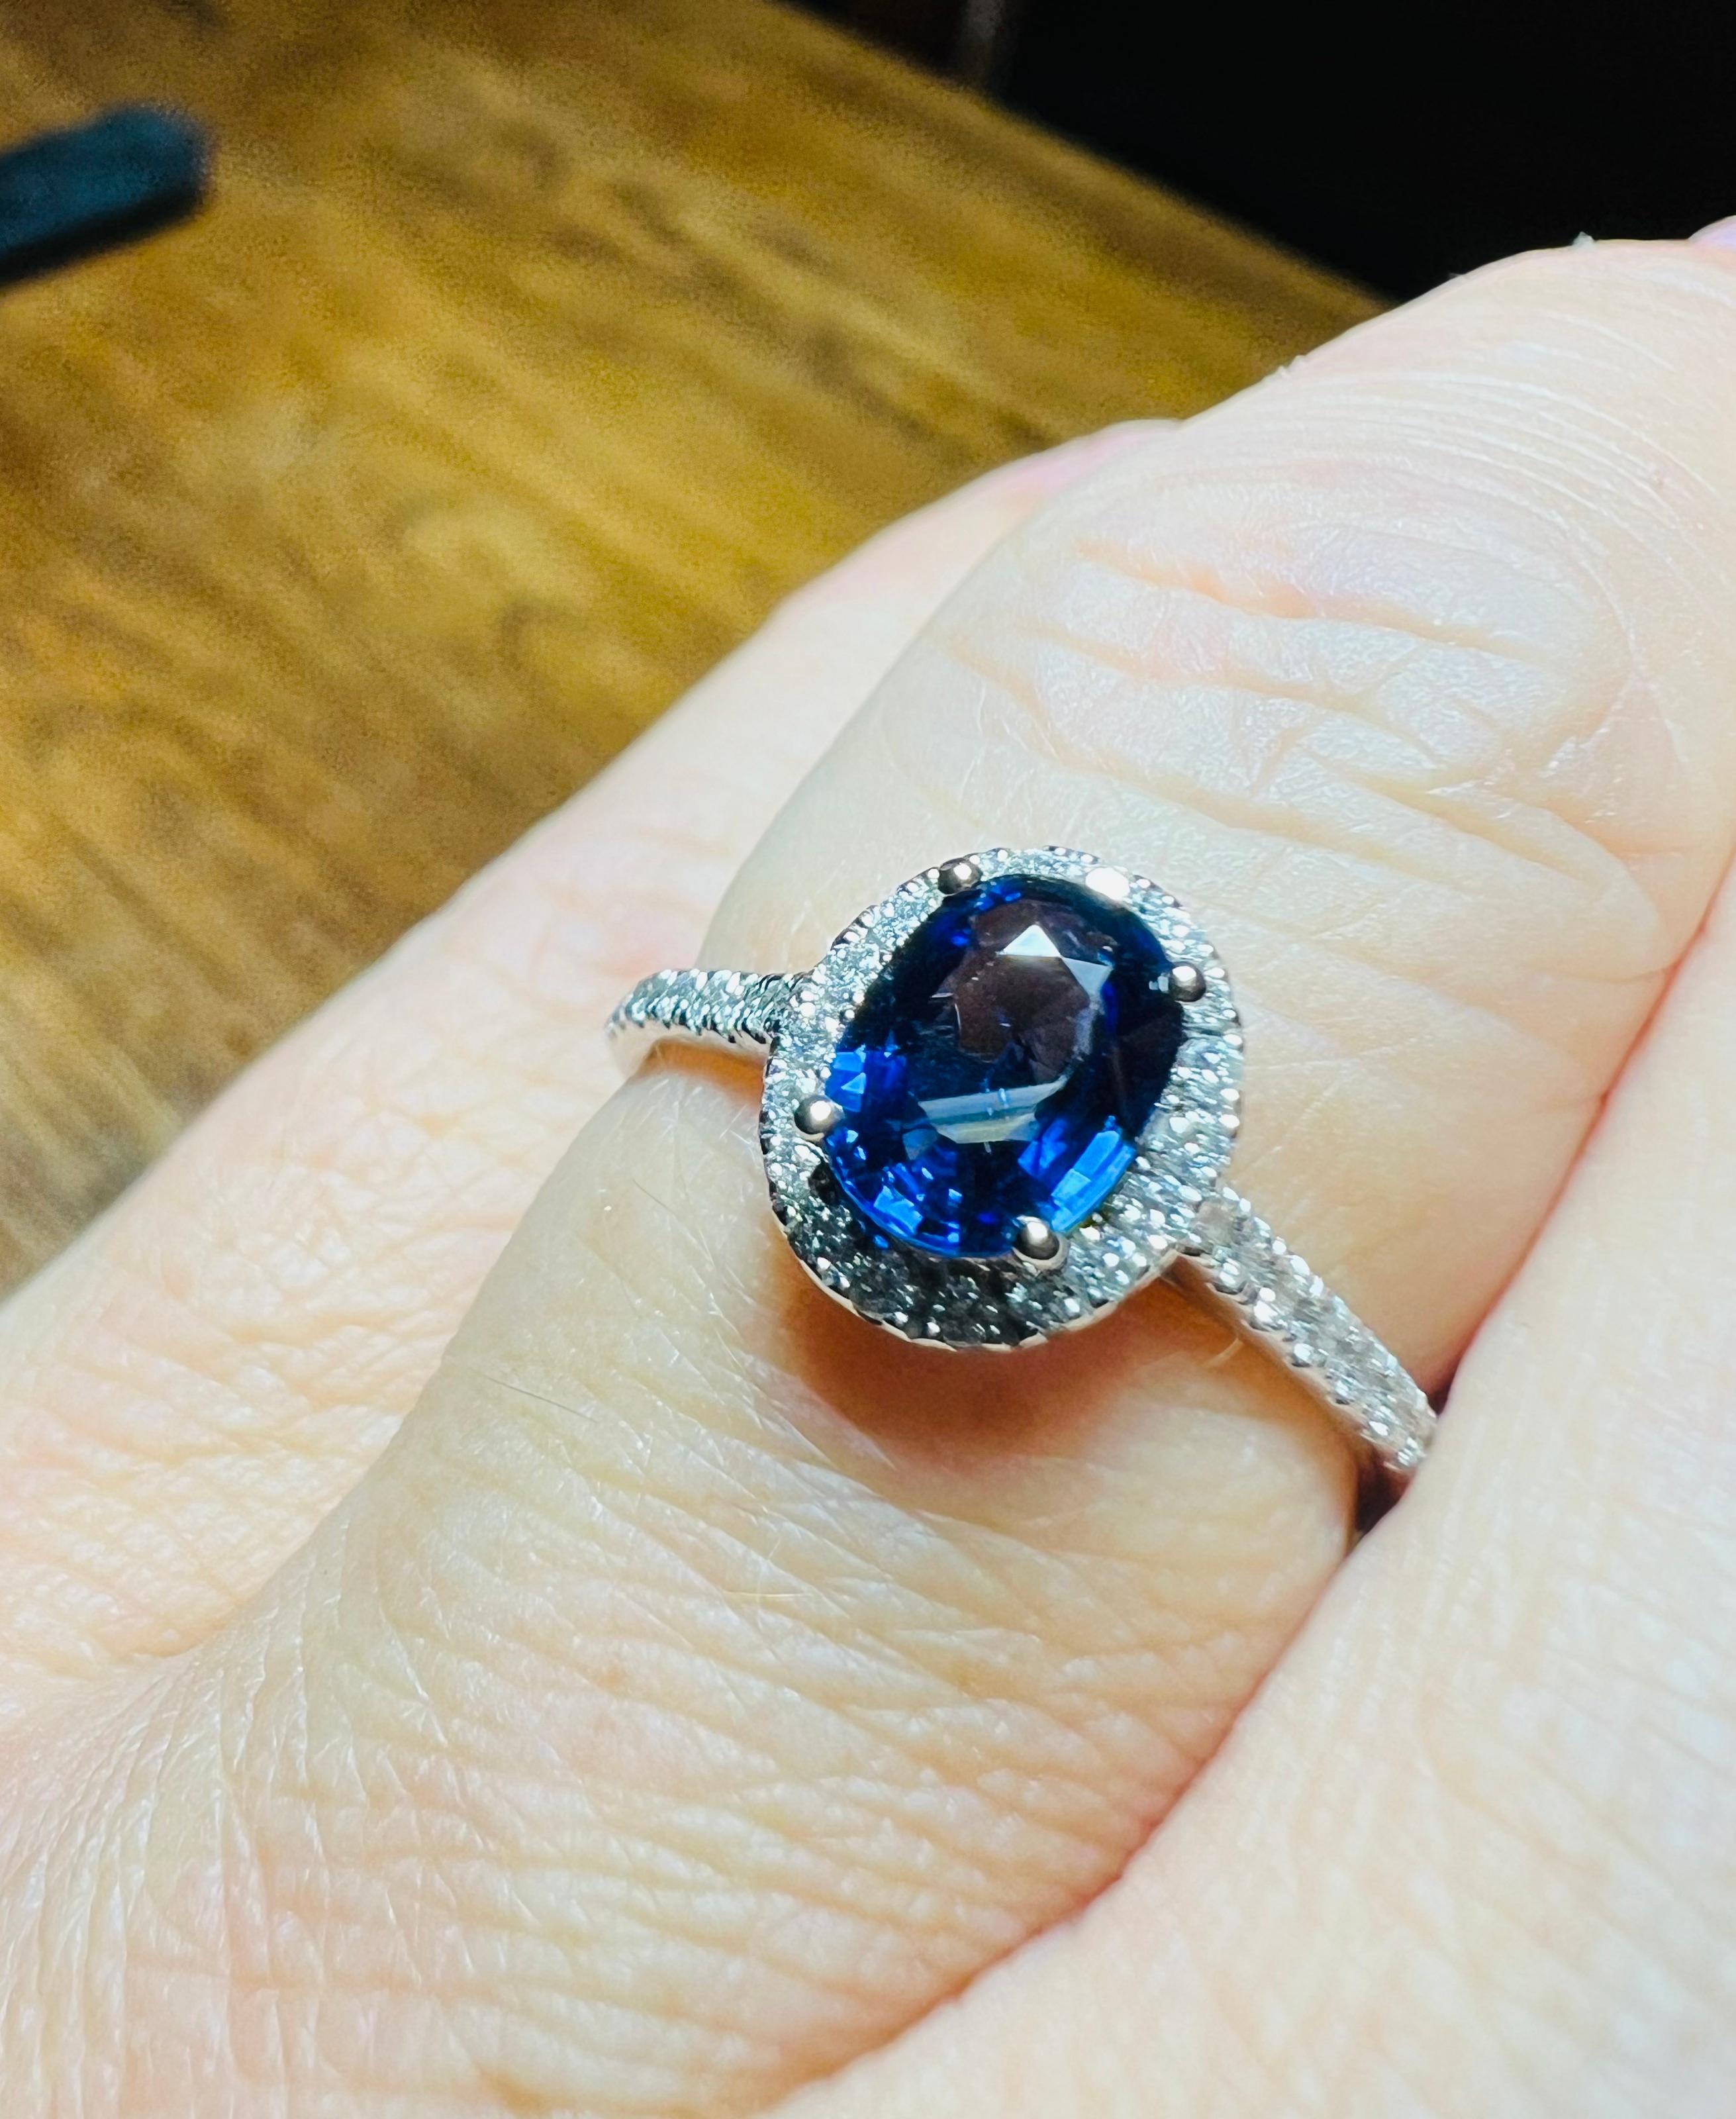 superb translucent deep blue sapphire 
surrounded by a paving of diamonds, 
ring in 18 carat white gold 
weight of the sapphire, oval, faceted: 0.89 carat
 weight of the paving of diamonds: approximately 0.23 carat in total total weight of the ring: